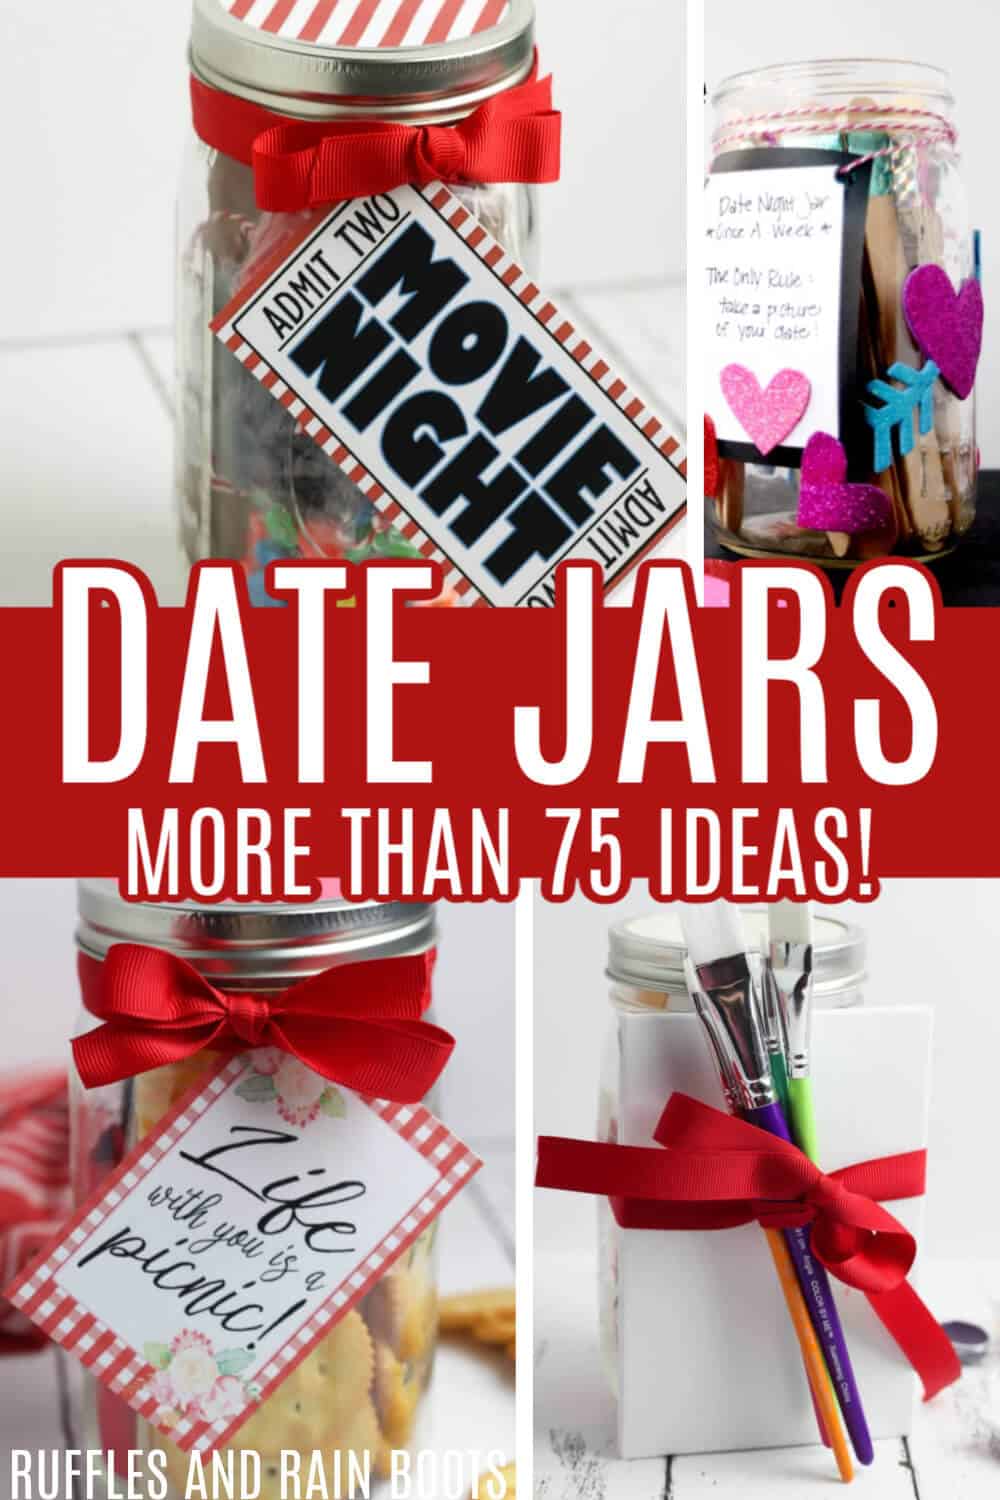 date night jars to make at home compilation on ruffles and rain boots